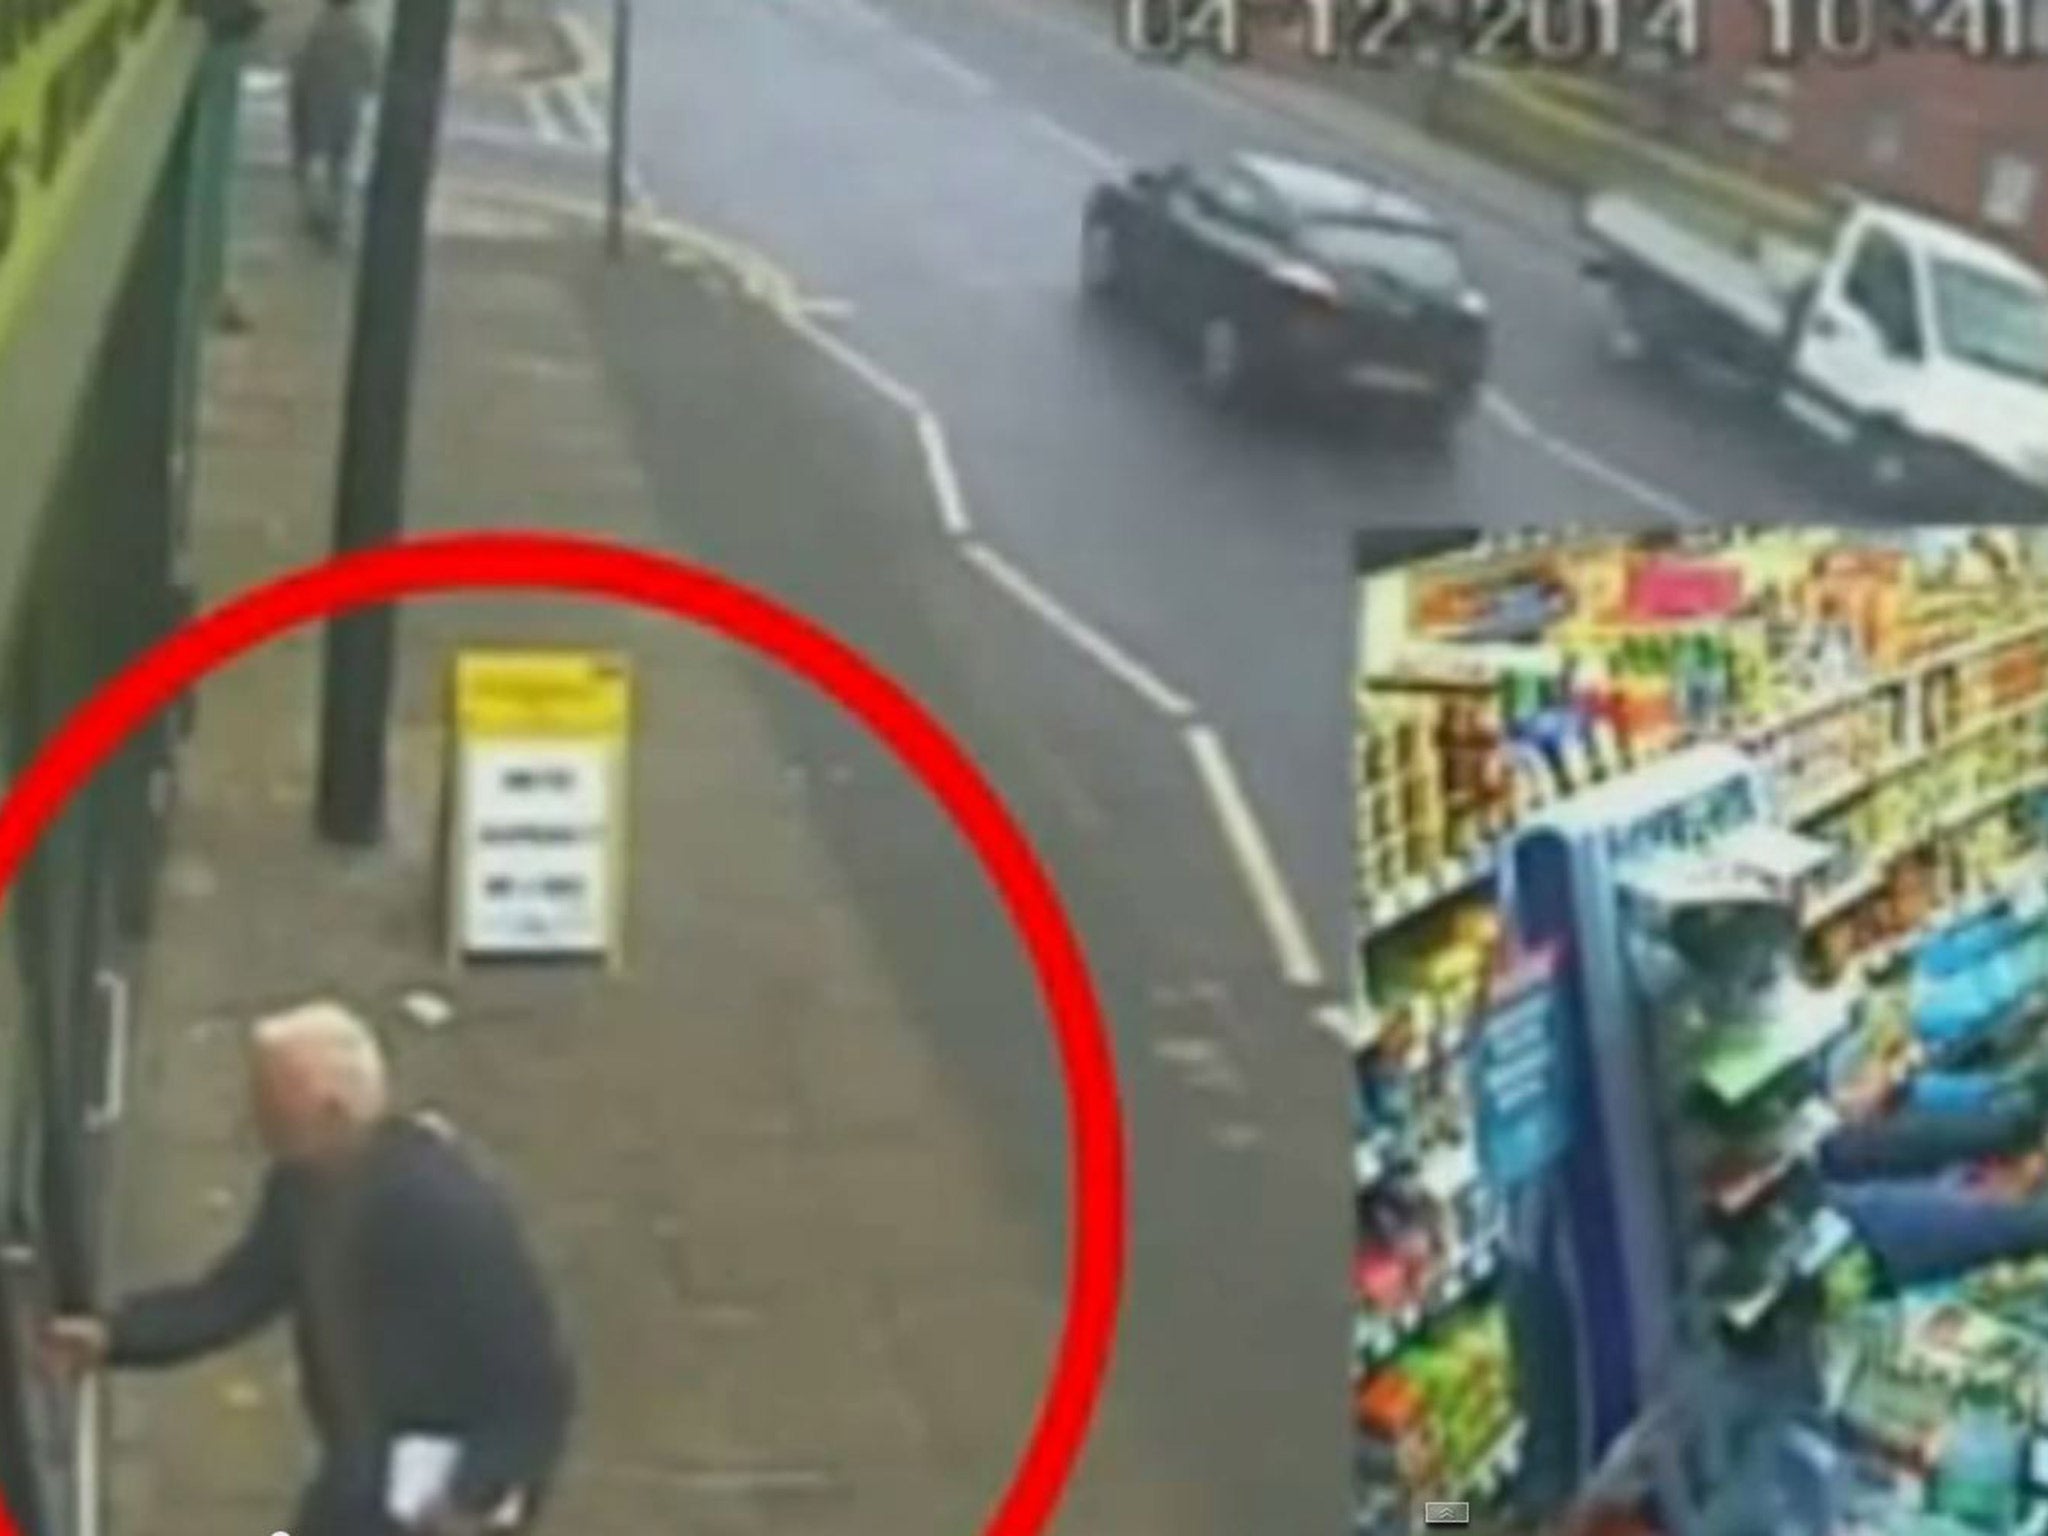 Ron Smith, 78, later joined by fellow pensioner Robert Anderson, barricaded the robber inside the shop